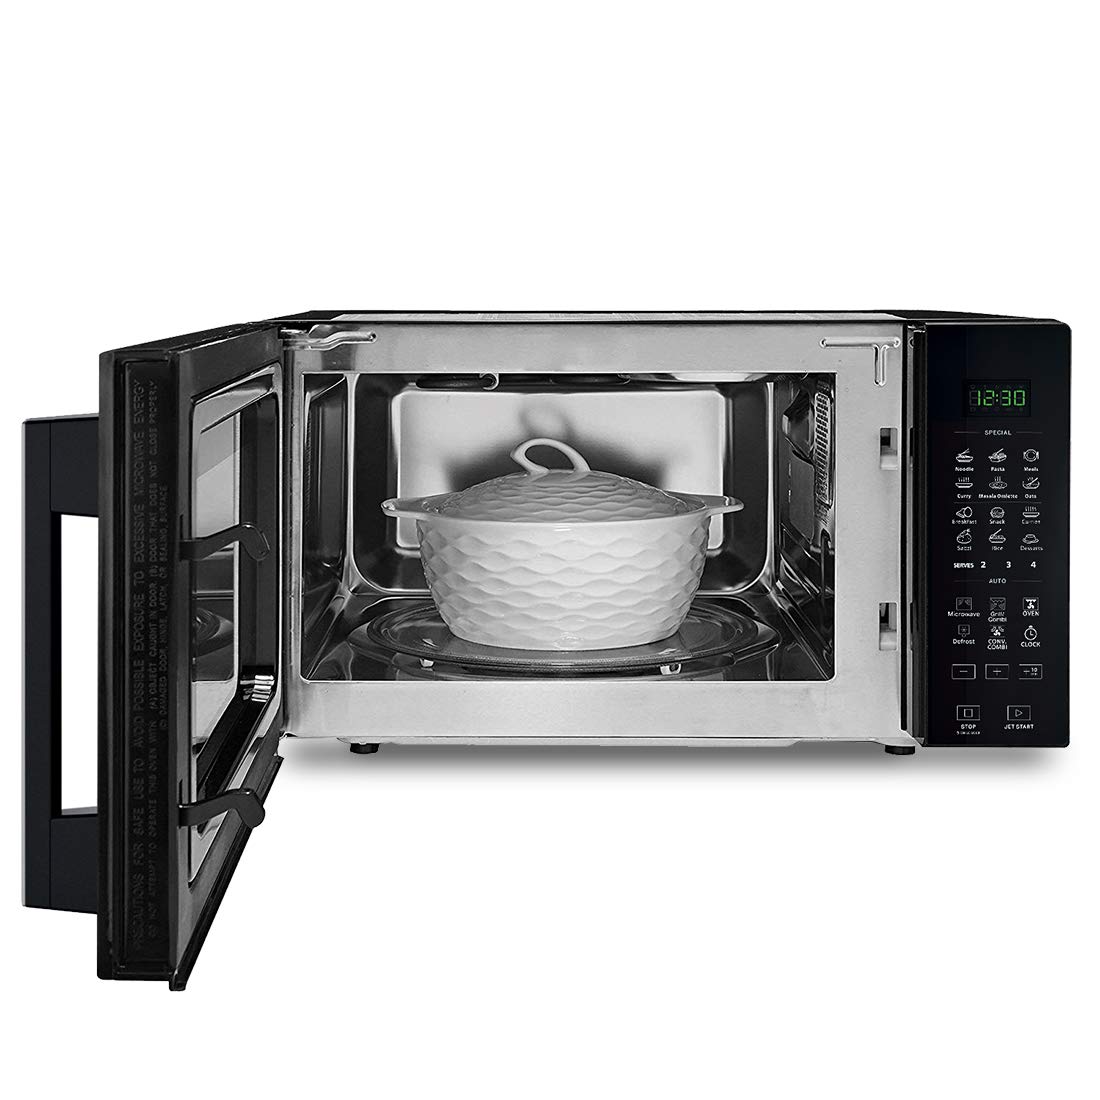 Whirlpool 20 L Convection Microwave Oven (MAGICOOKPRO22CE,Black) -11471